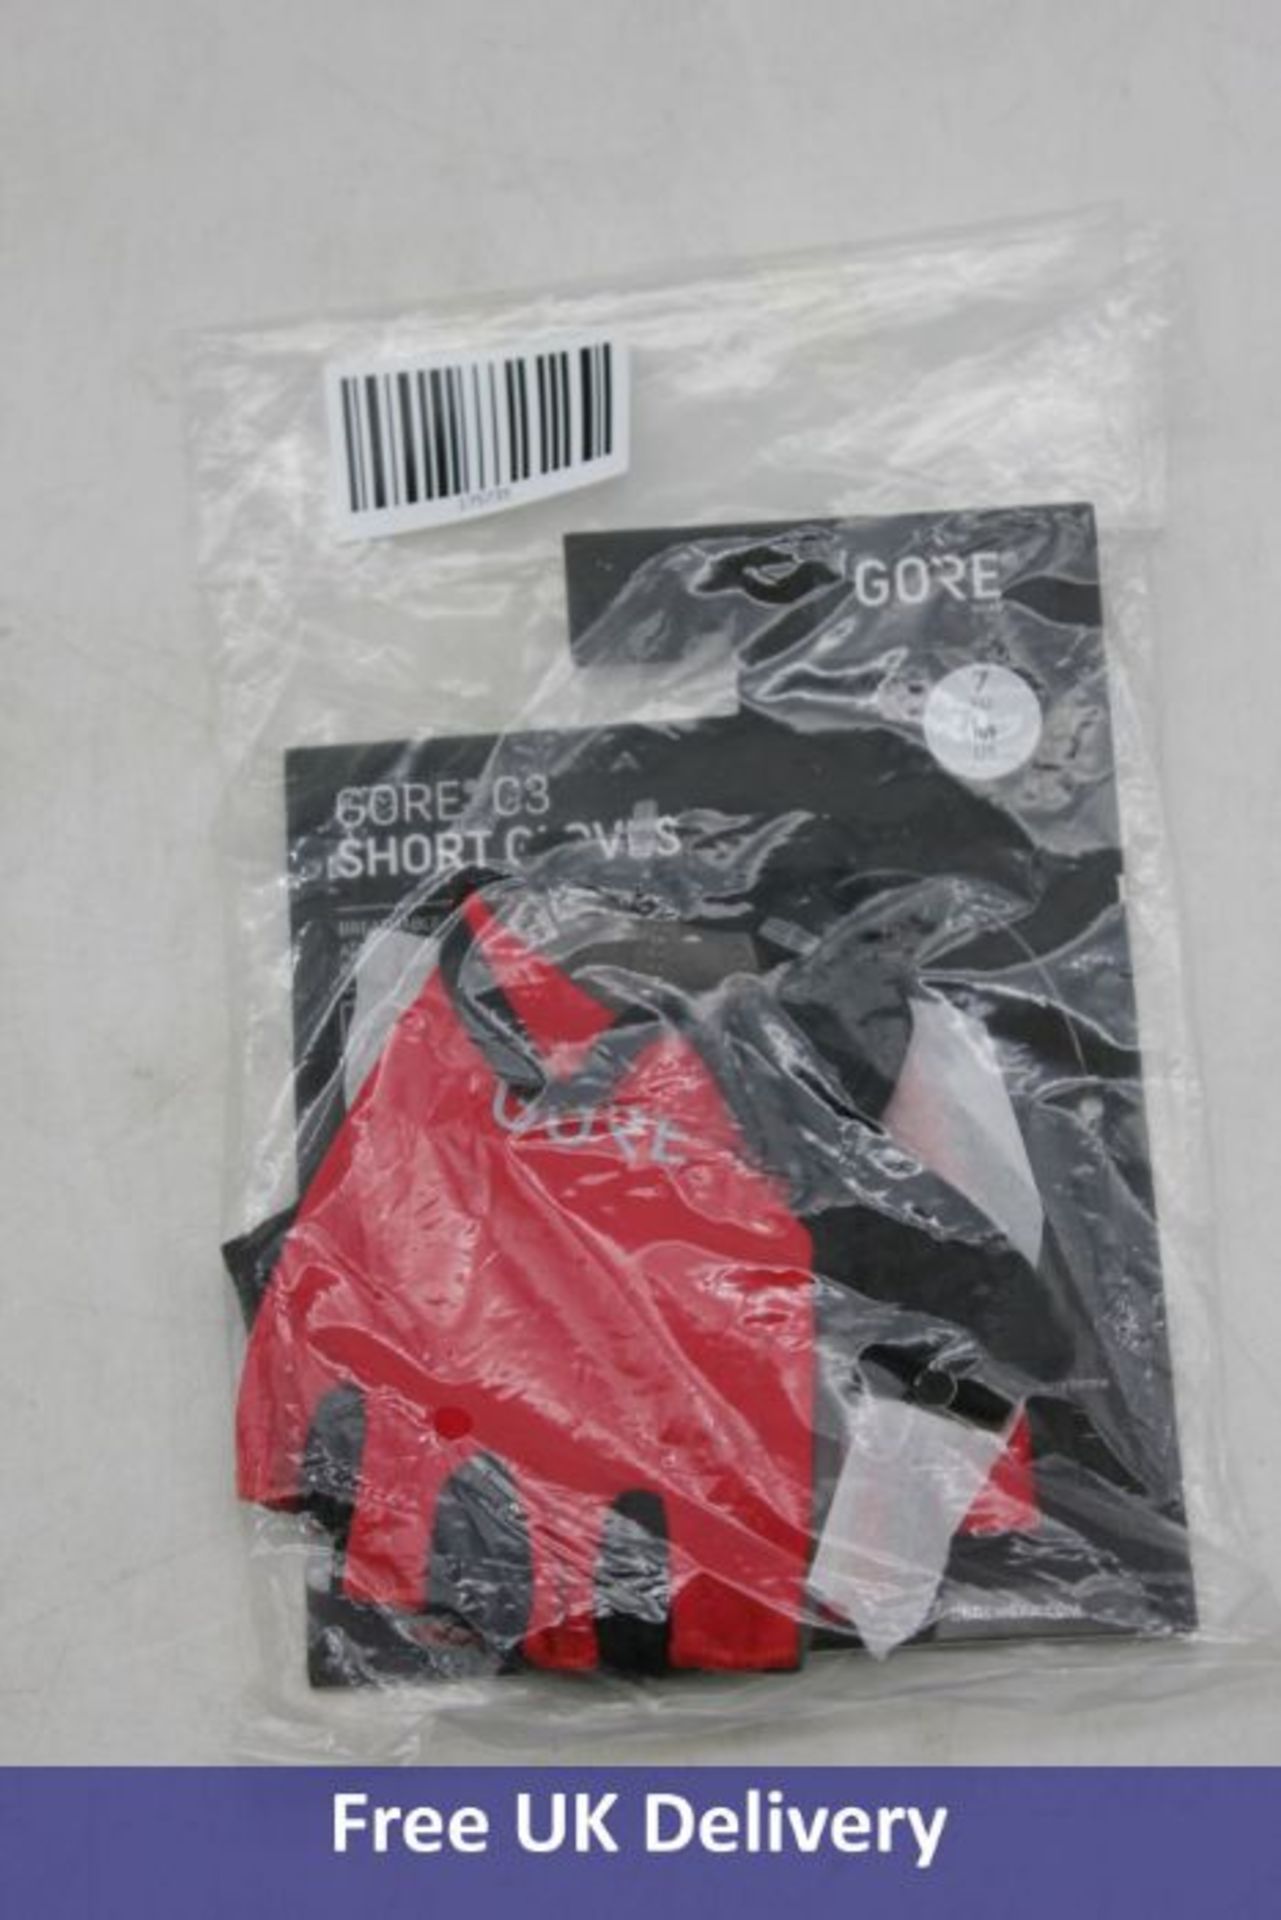 Two Gore Wear C3 Short Gloves, 1x White, S, 1x Red, M - Image 2 of 2